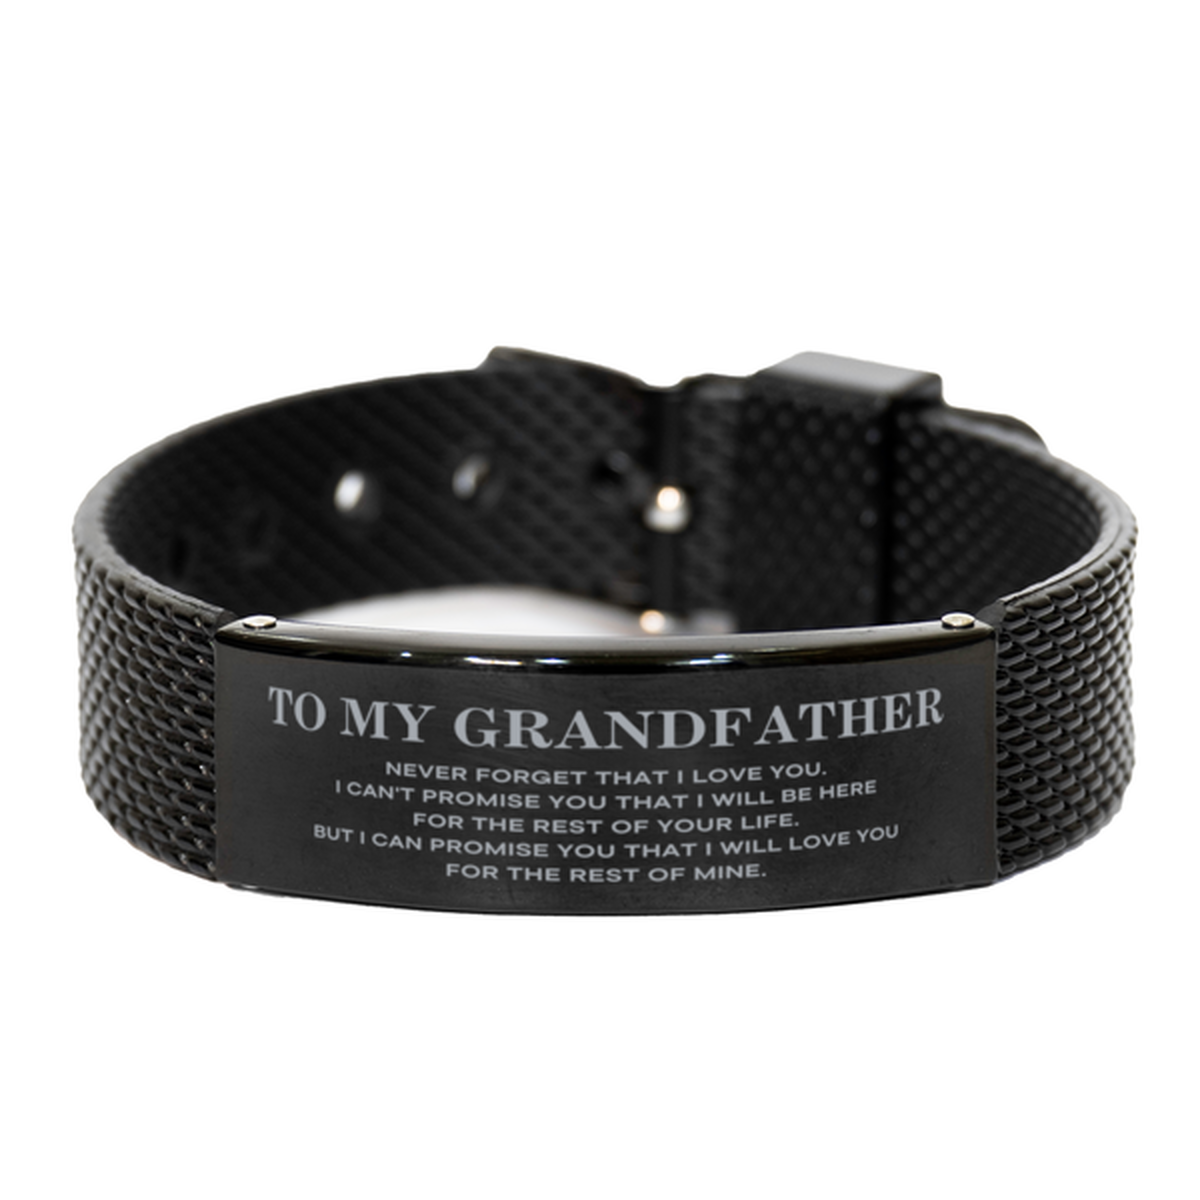 To My Grandfather Gifts, I will love you for the rest of mine, Love Grandfather Bracelet, Birthday Christmas Unique Black Shark Mesh Bracelet For Grandfather